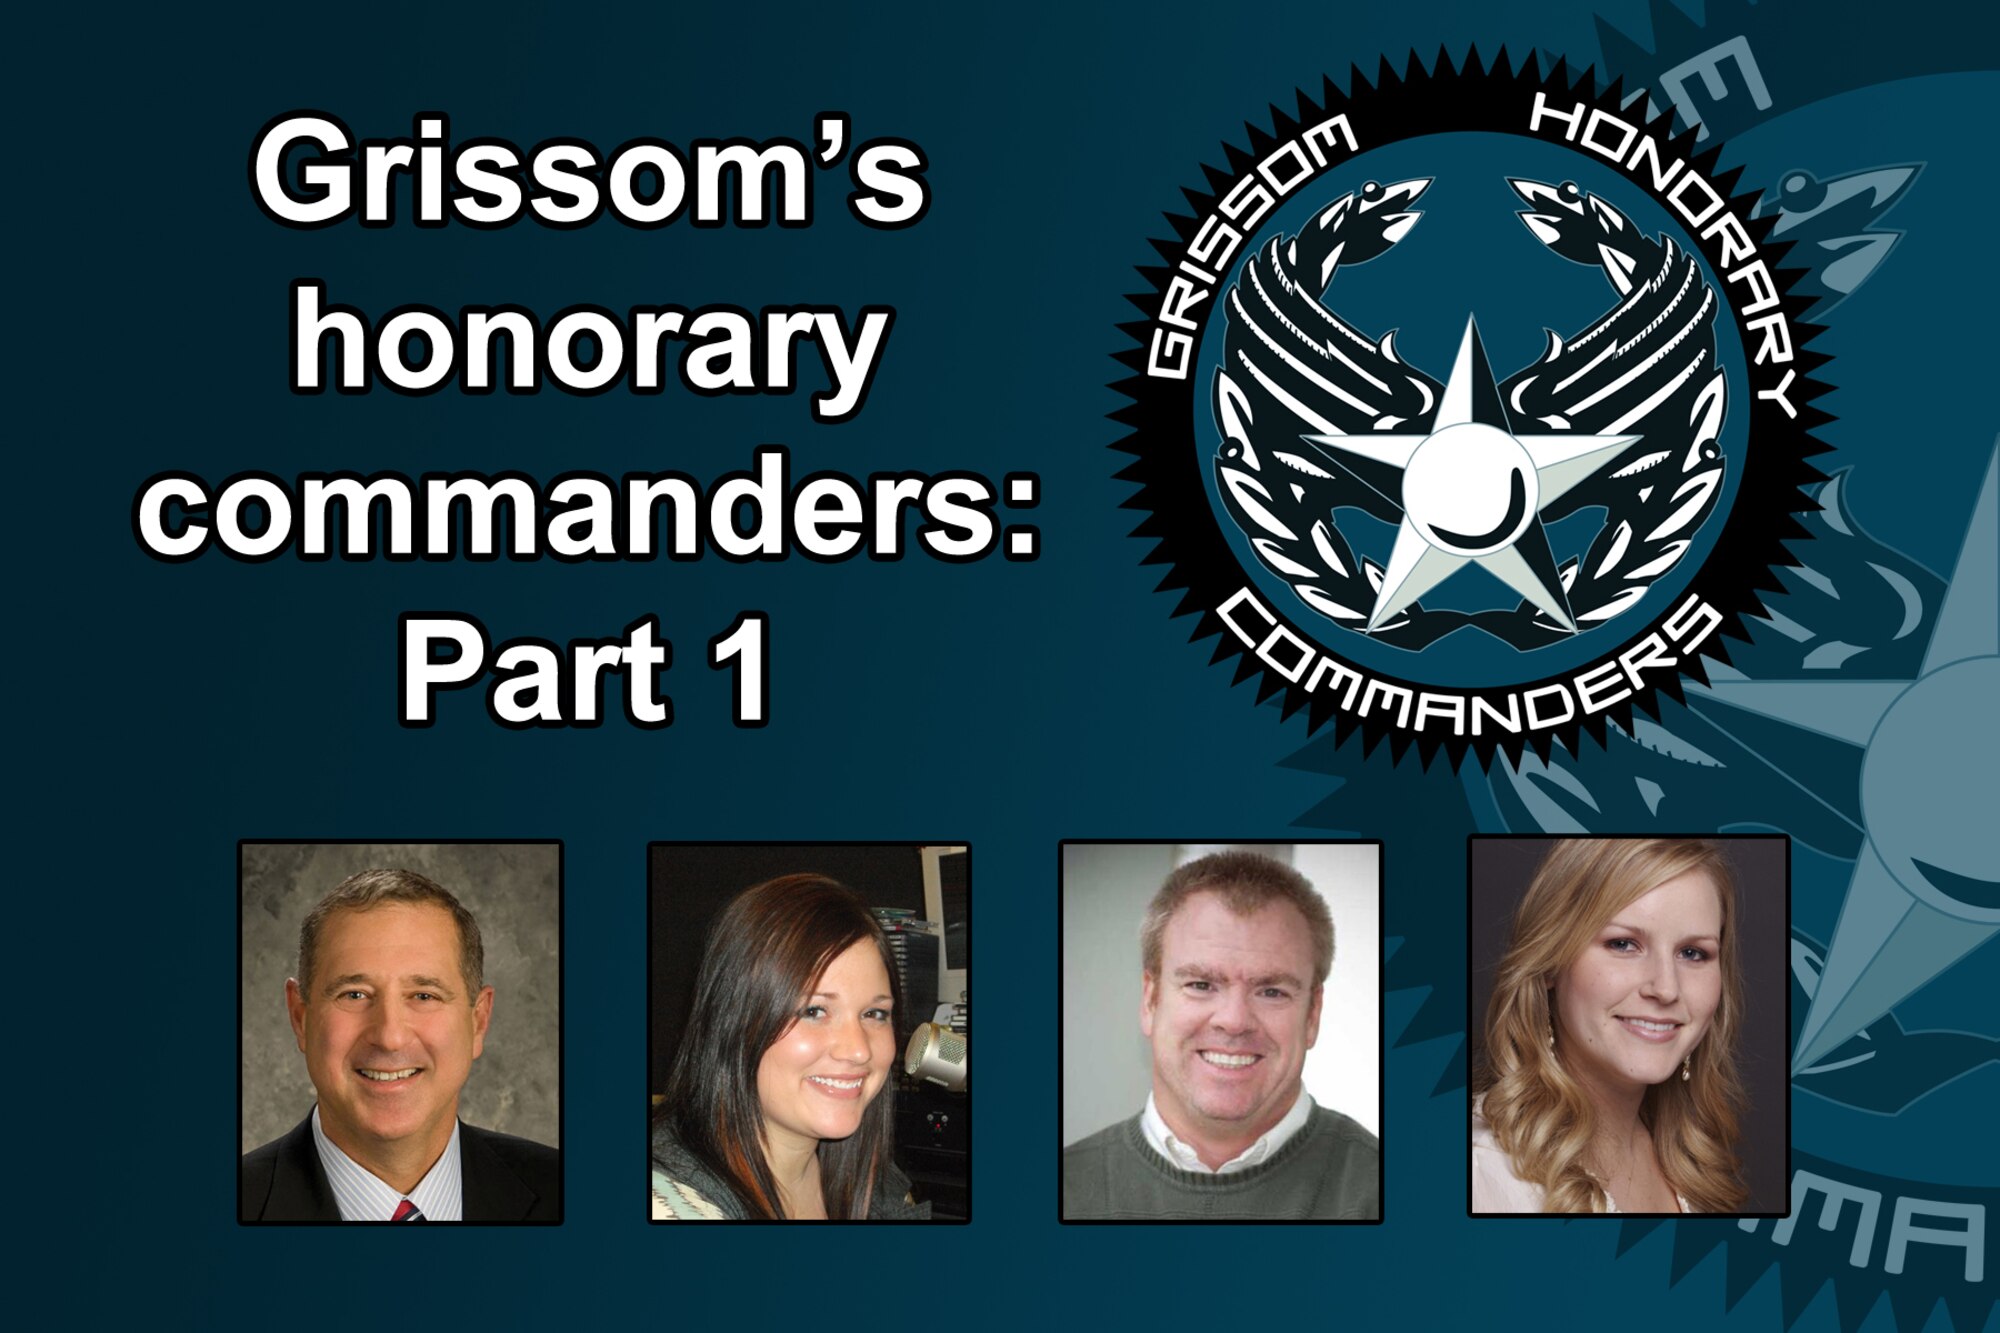 GRISSOM AIR RESERVE BASE, Ind. -- Dr. Michael Harris, Jessica Green, Leilan McNally and Andrea Zwiebel were recently selected to be Grissom's 2012 honorary commanders. These four, along with three others, will assume their commander responsibilities during a special assumption of command ceremony Feb. 12. (U.S. Air Force photo/Tech. Sgt. Mark R. W. Orders-Woempner) 
